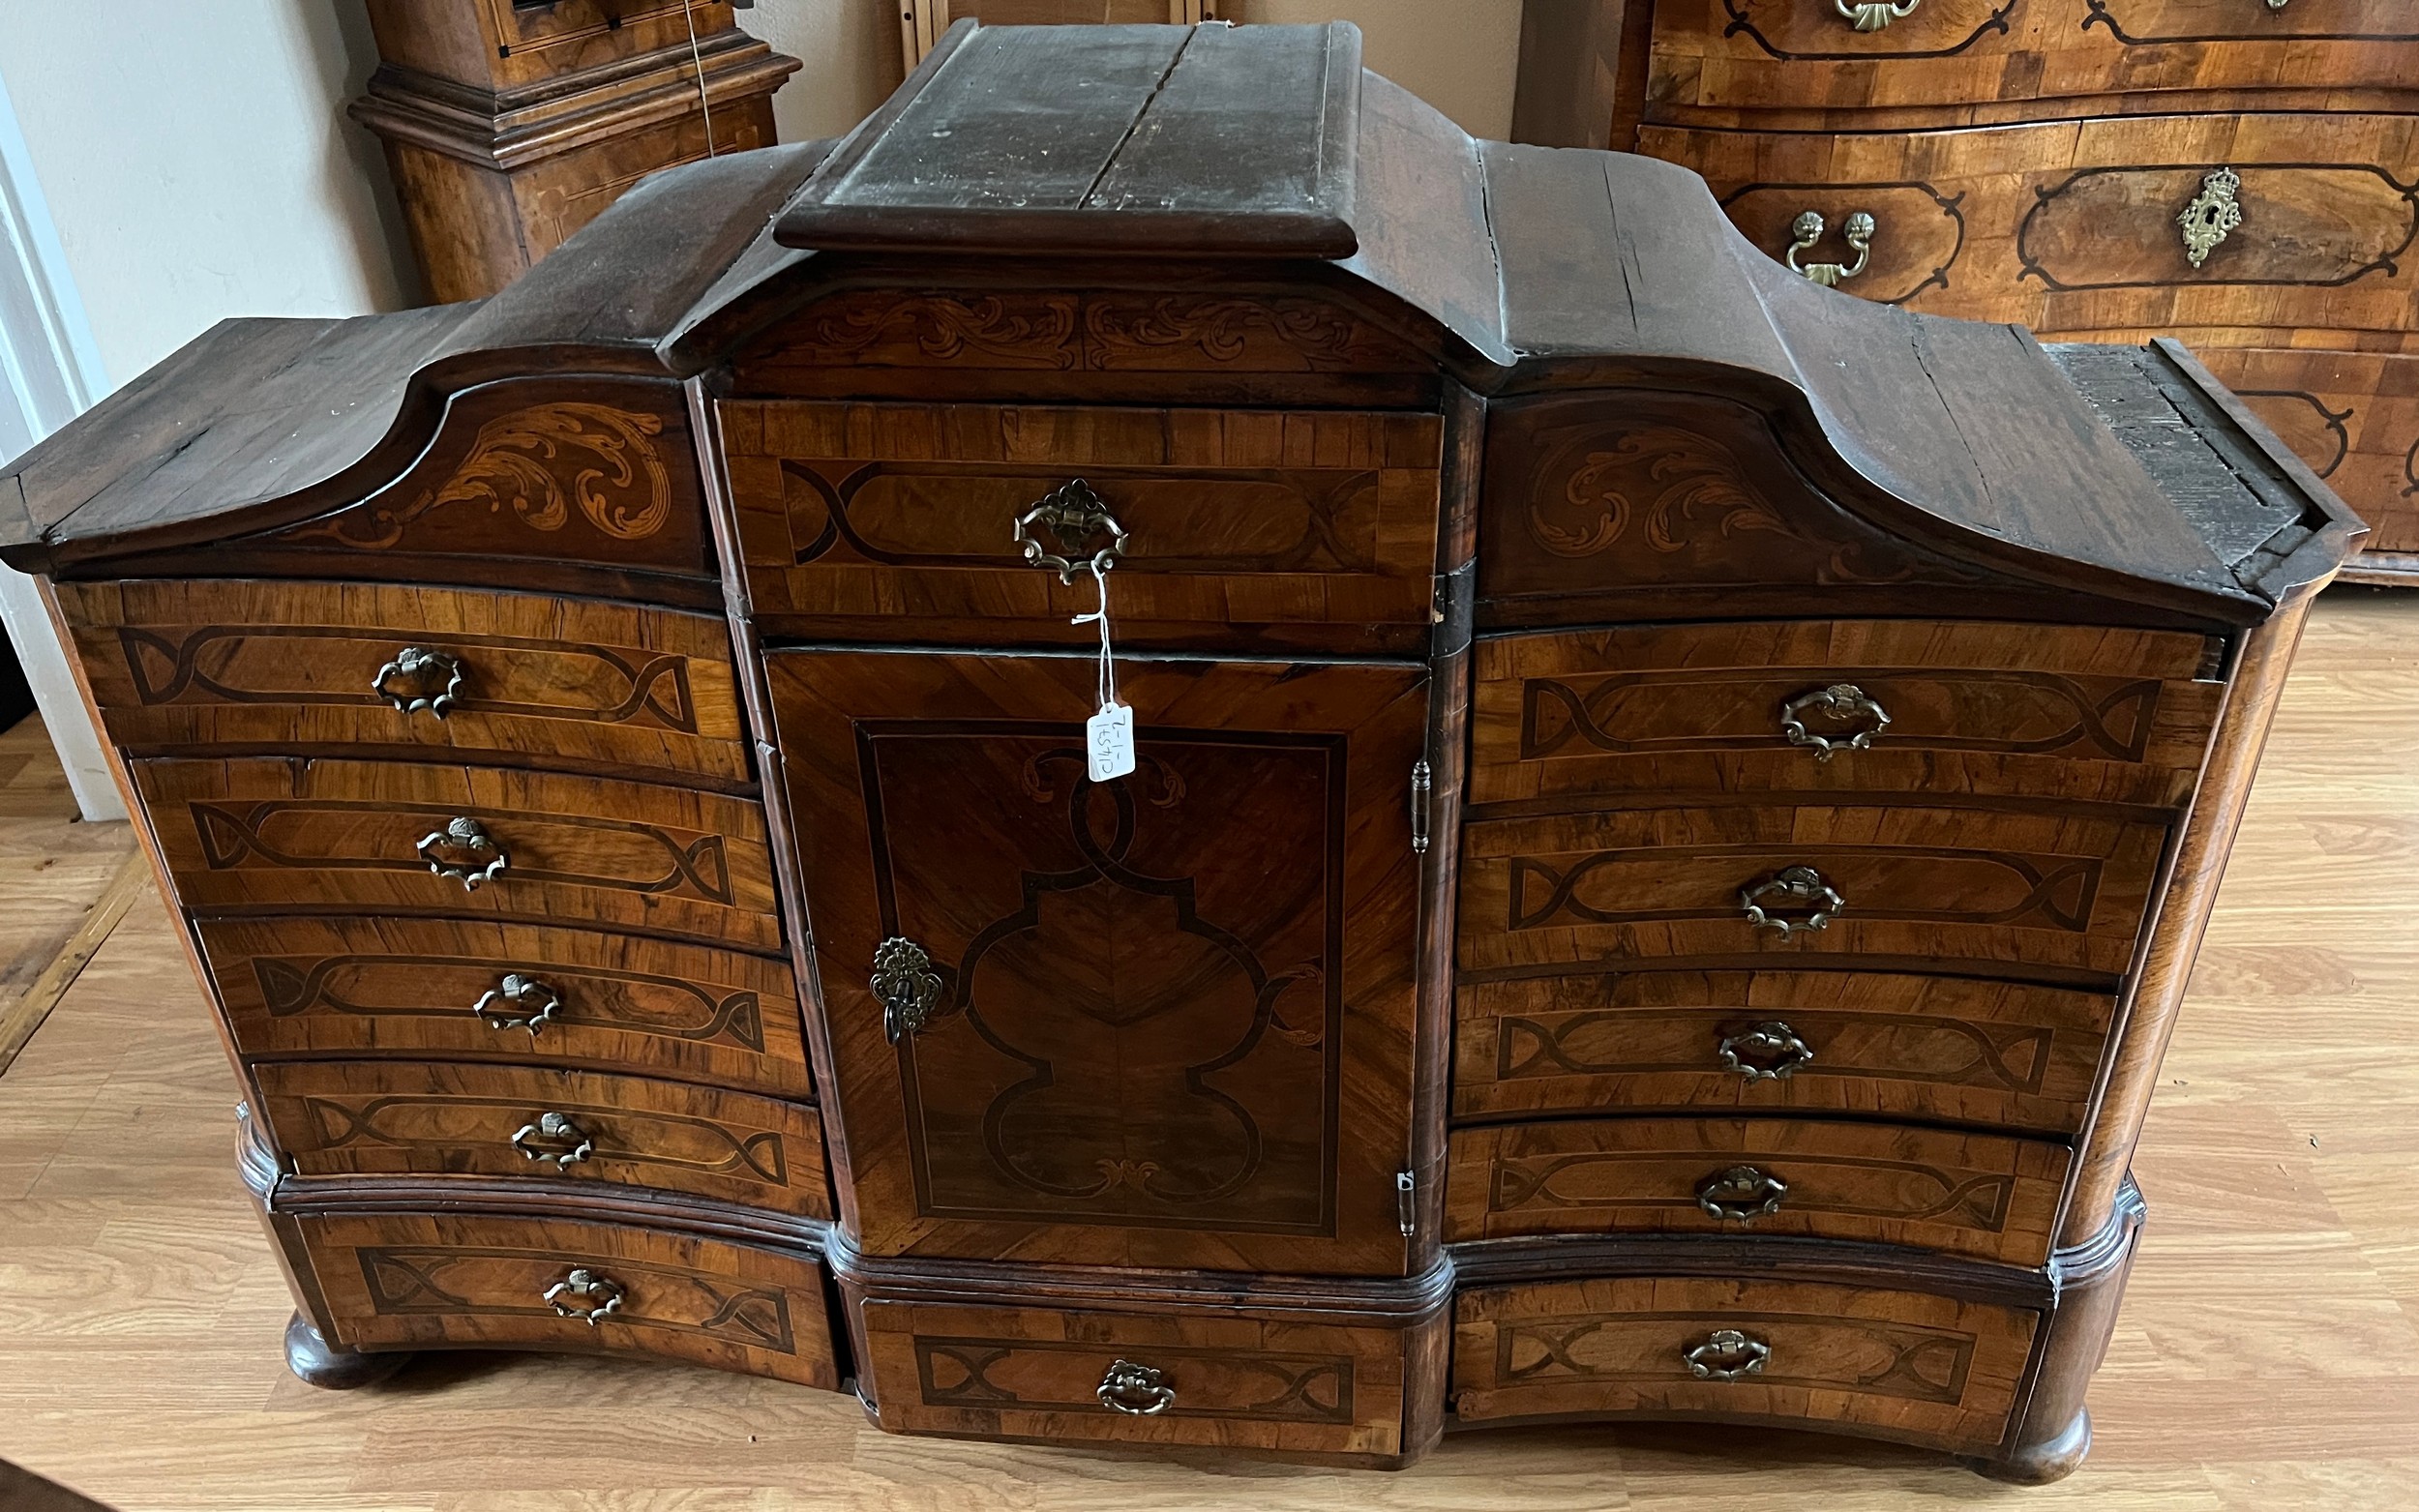 An 18thC Austrian parquetry/marquetry inlaid table top cabinet with multiple drawers and central - Bild 14 aus 14